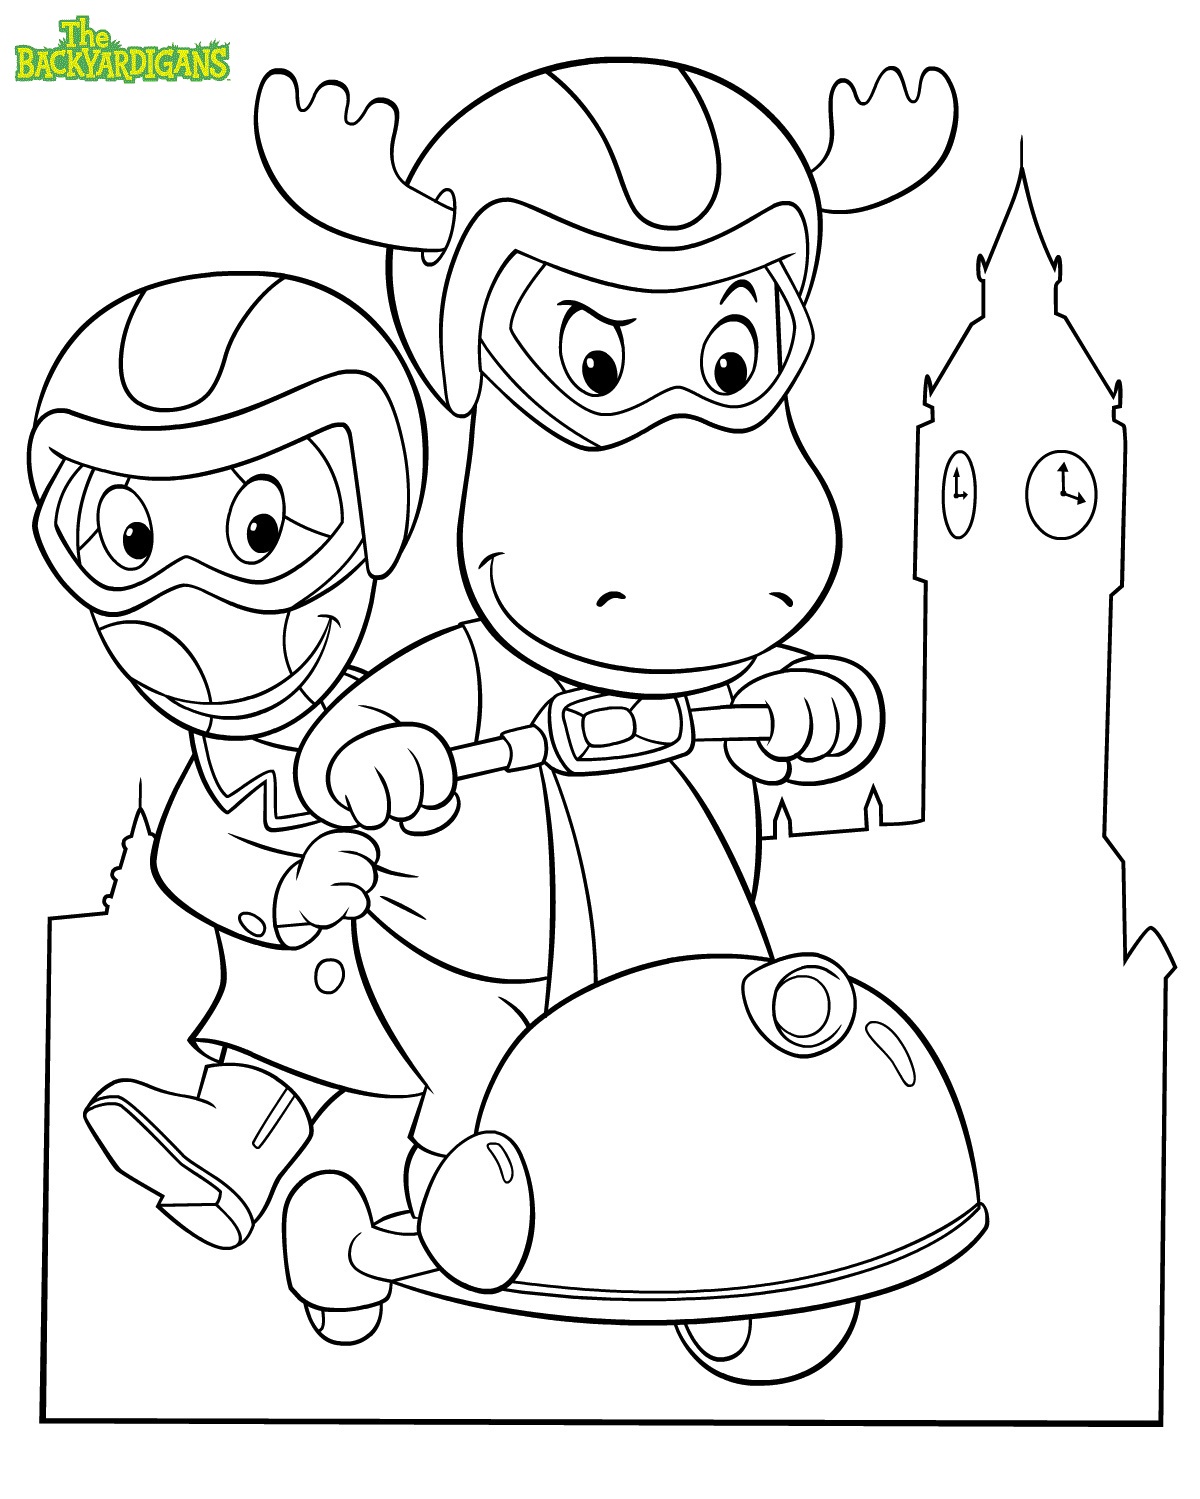 The Backyardigans Colouring Pages To Print